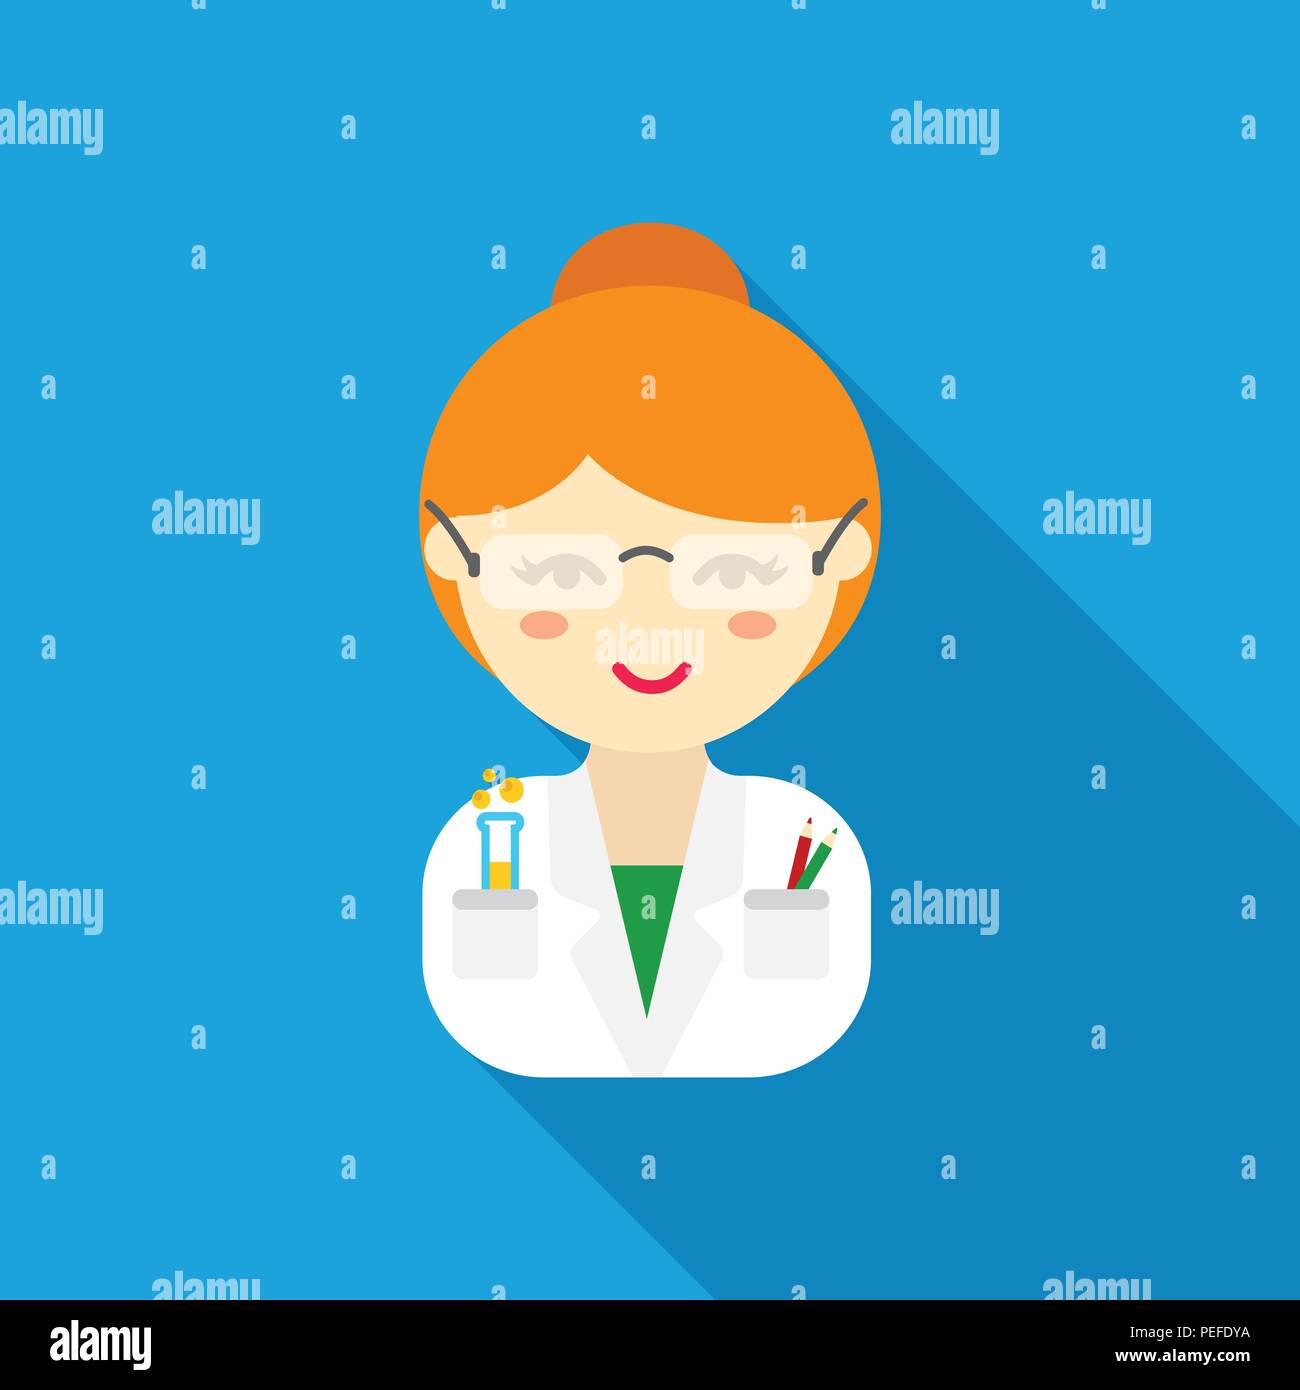 app,avatar,background,cartoon,character,chemist,chemistry,color,concept,design,doctor,education,element,experiment,face,female,flat,glasses,gray,icon,illustration,intelligence,inventor,isolated,lab,laboratory,logo,male,medicine,object,old,person  ...